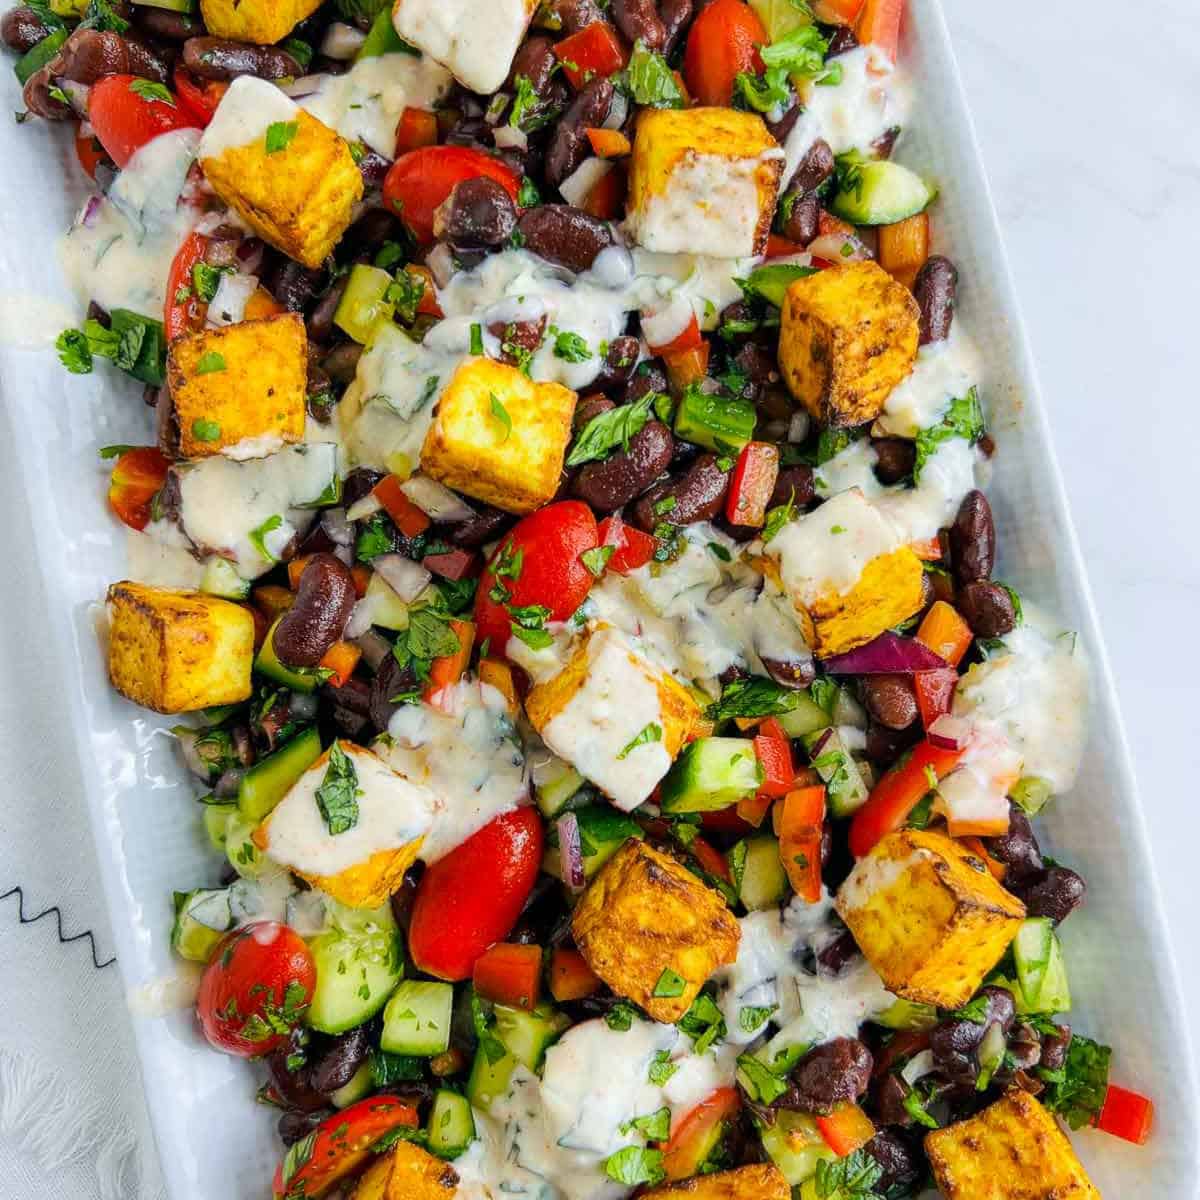 Assembling salad with paneer and dressing.